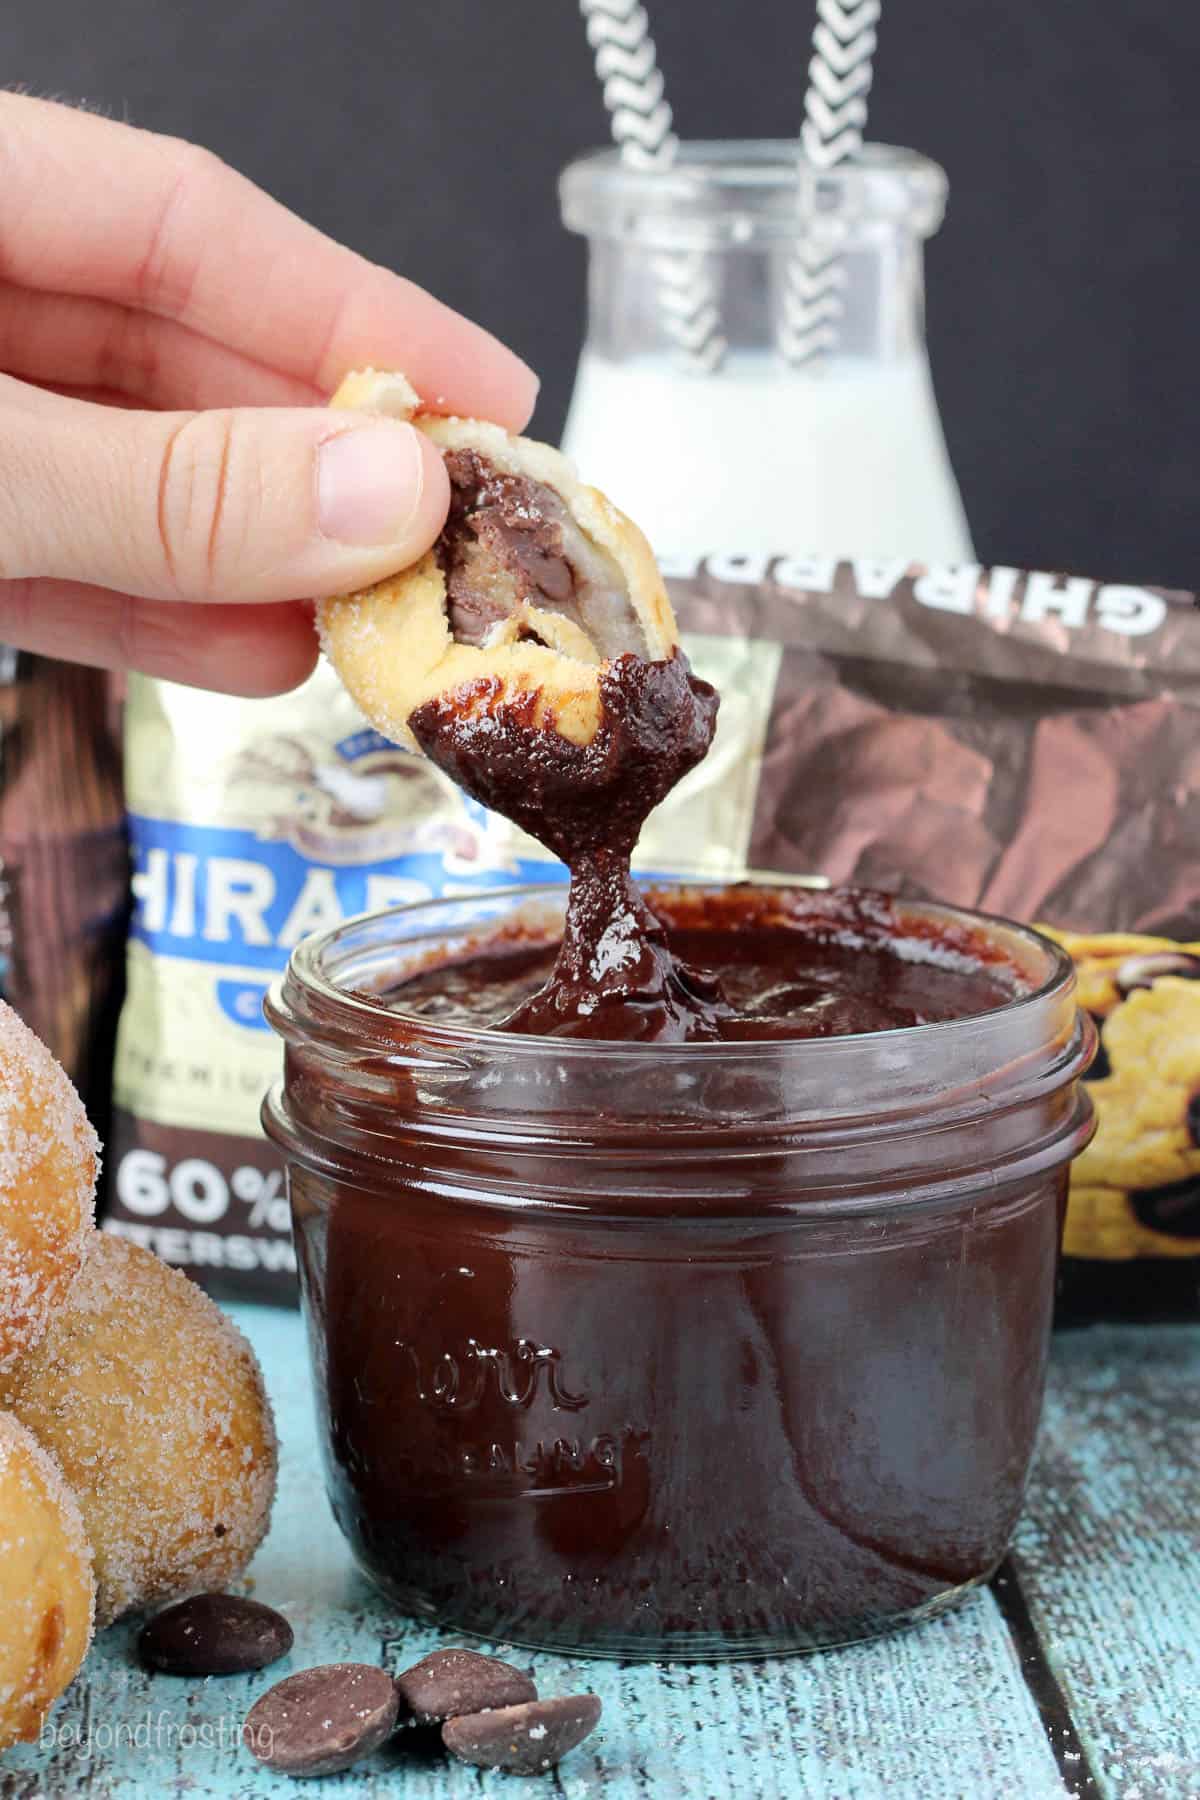 a cookie dough donut hole with a bite out being dipped into a jar of melted chocolate